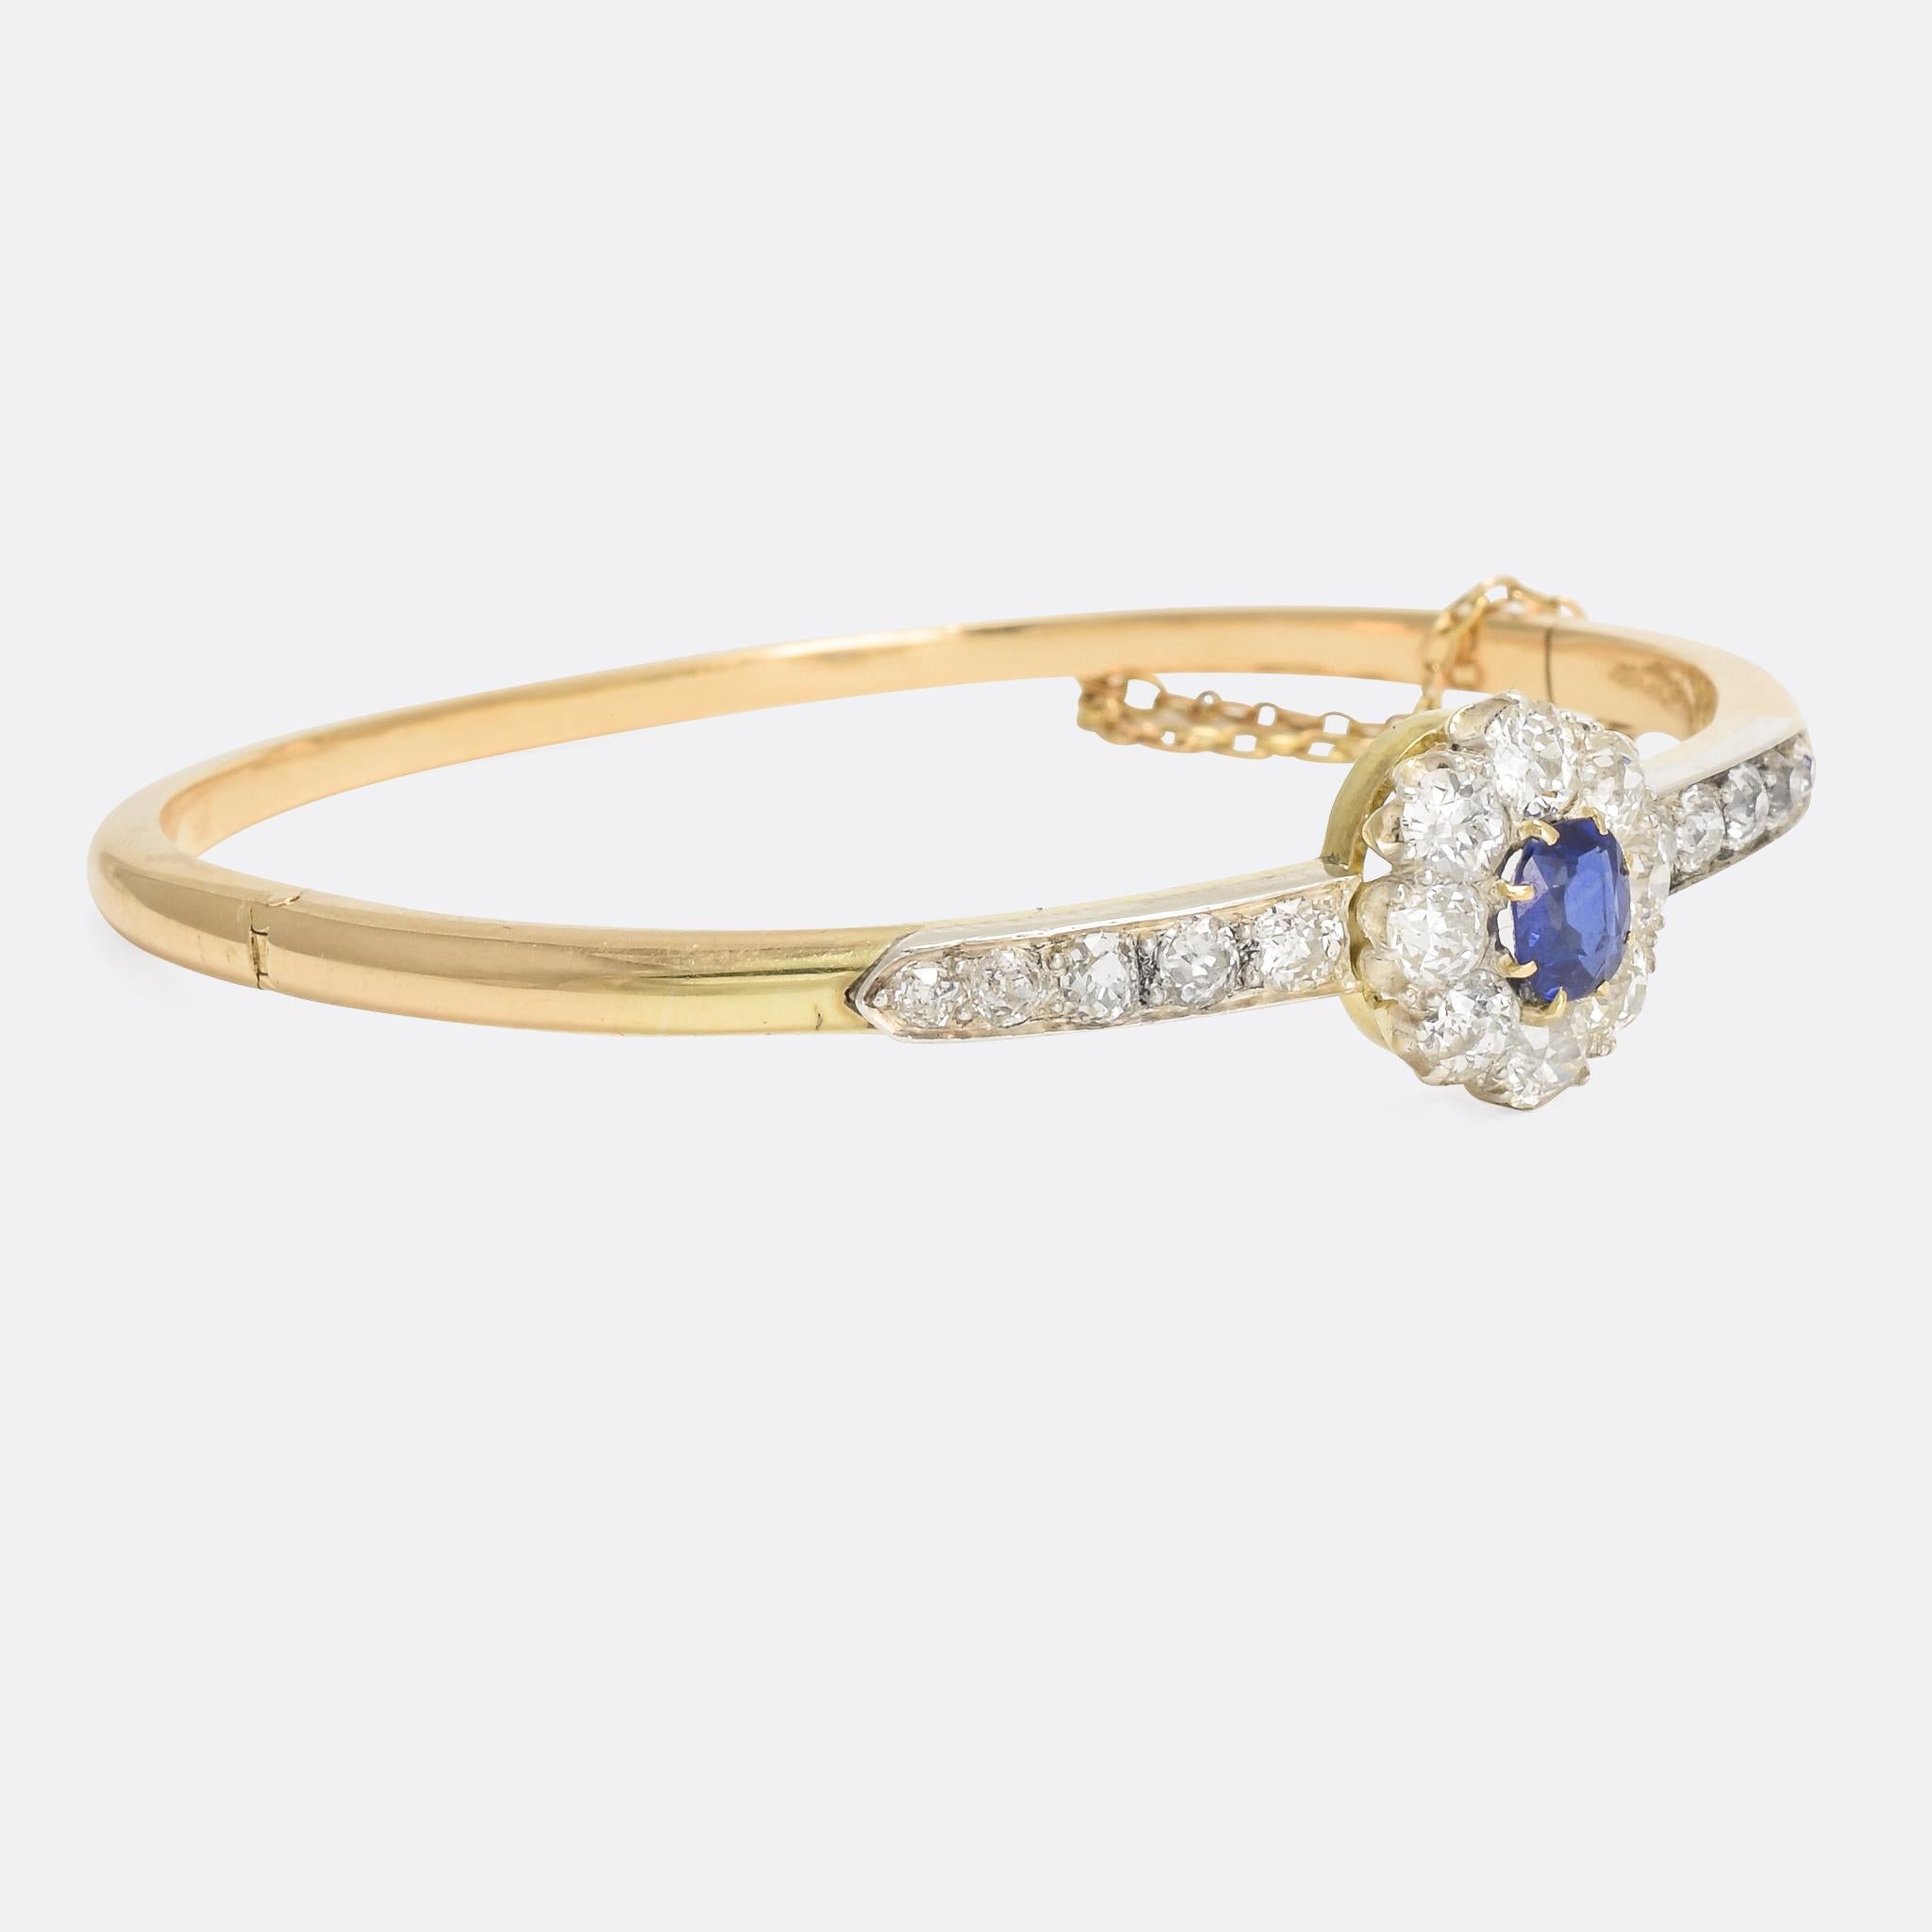 A stunning Victorian bangle, the head set with a vibrant blue sapphire within a cluster of cushion cut diamonds. More diamonds radiate out from the head, mounted in platinum to enhance their colour. It's a beautifully constructed piece that dates